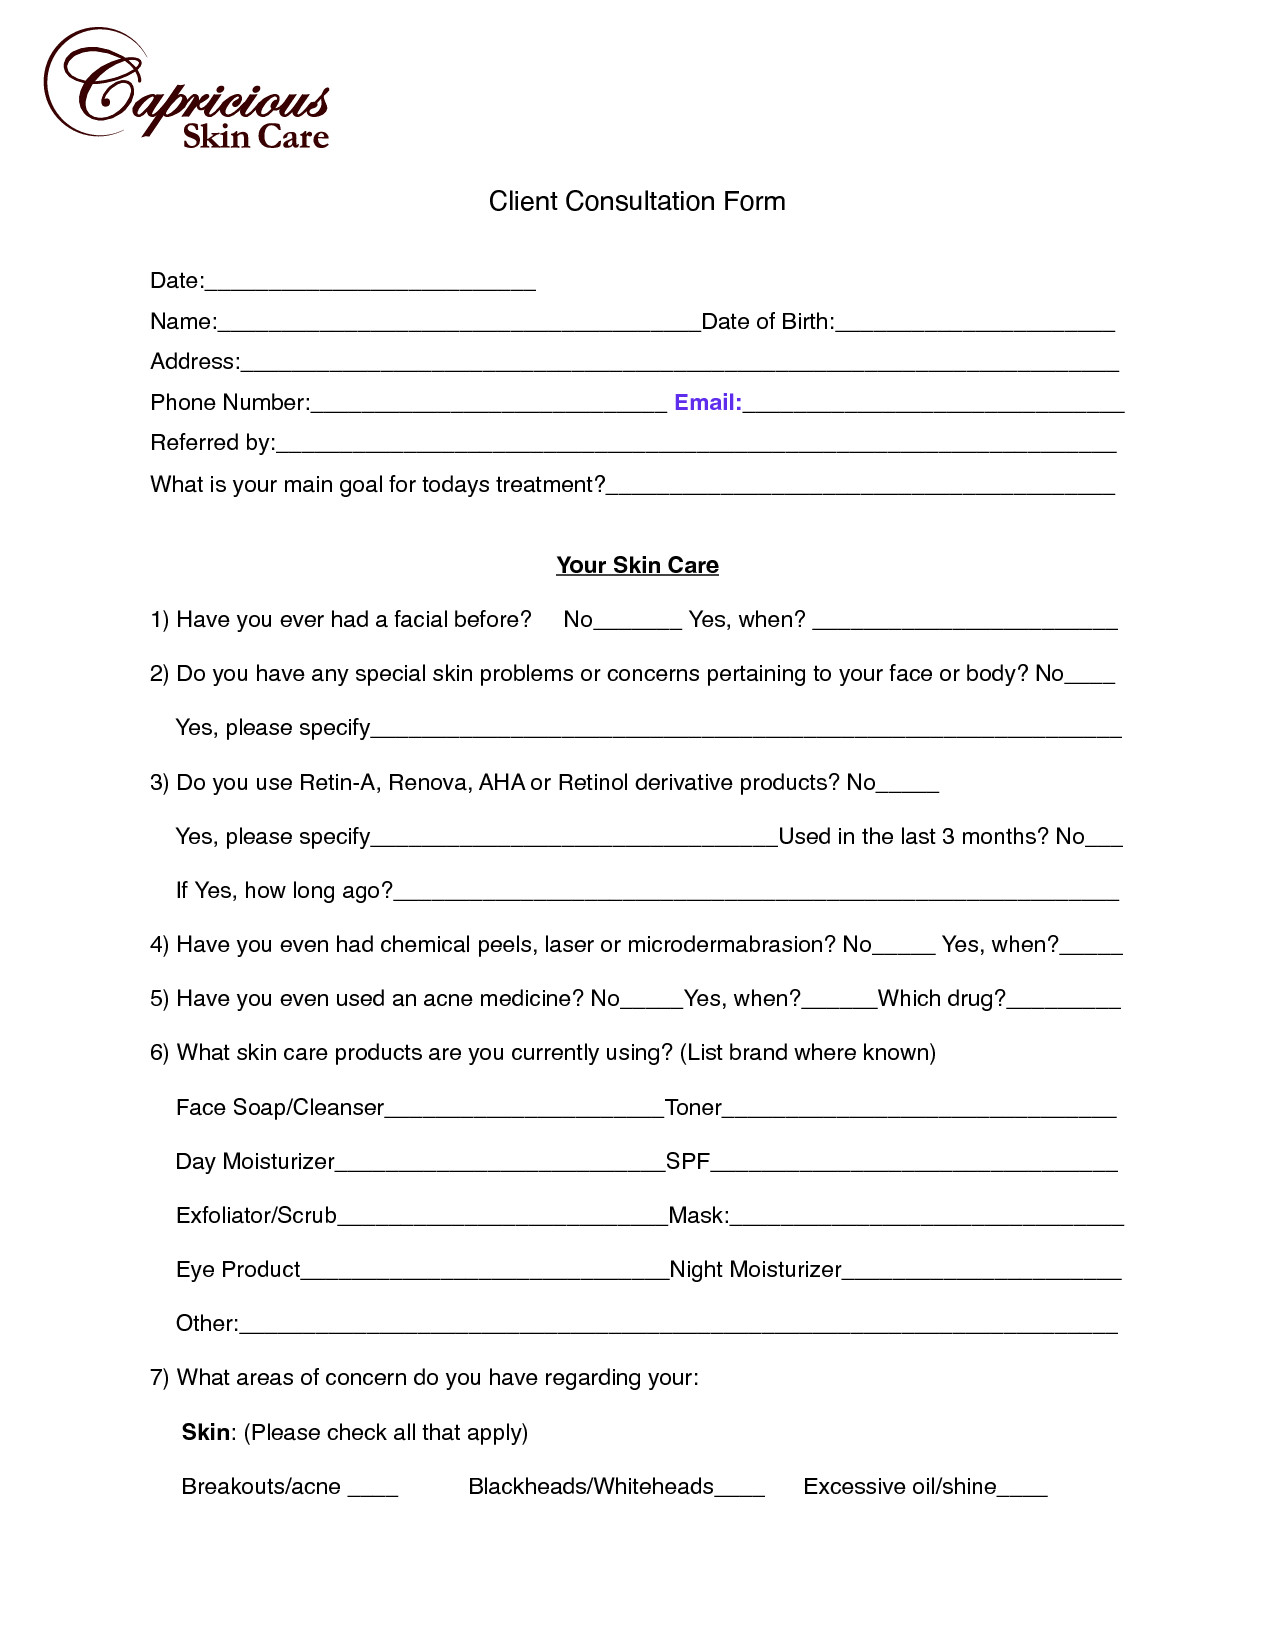 image chemical peel consultation form